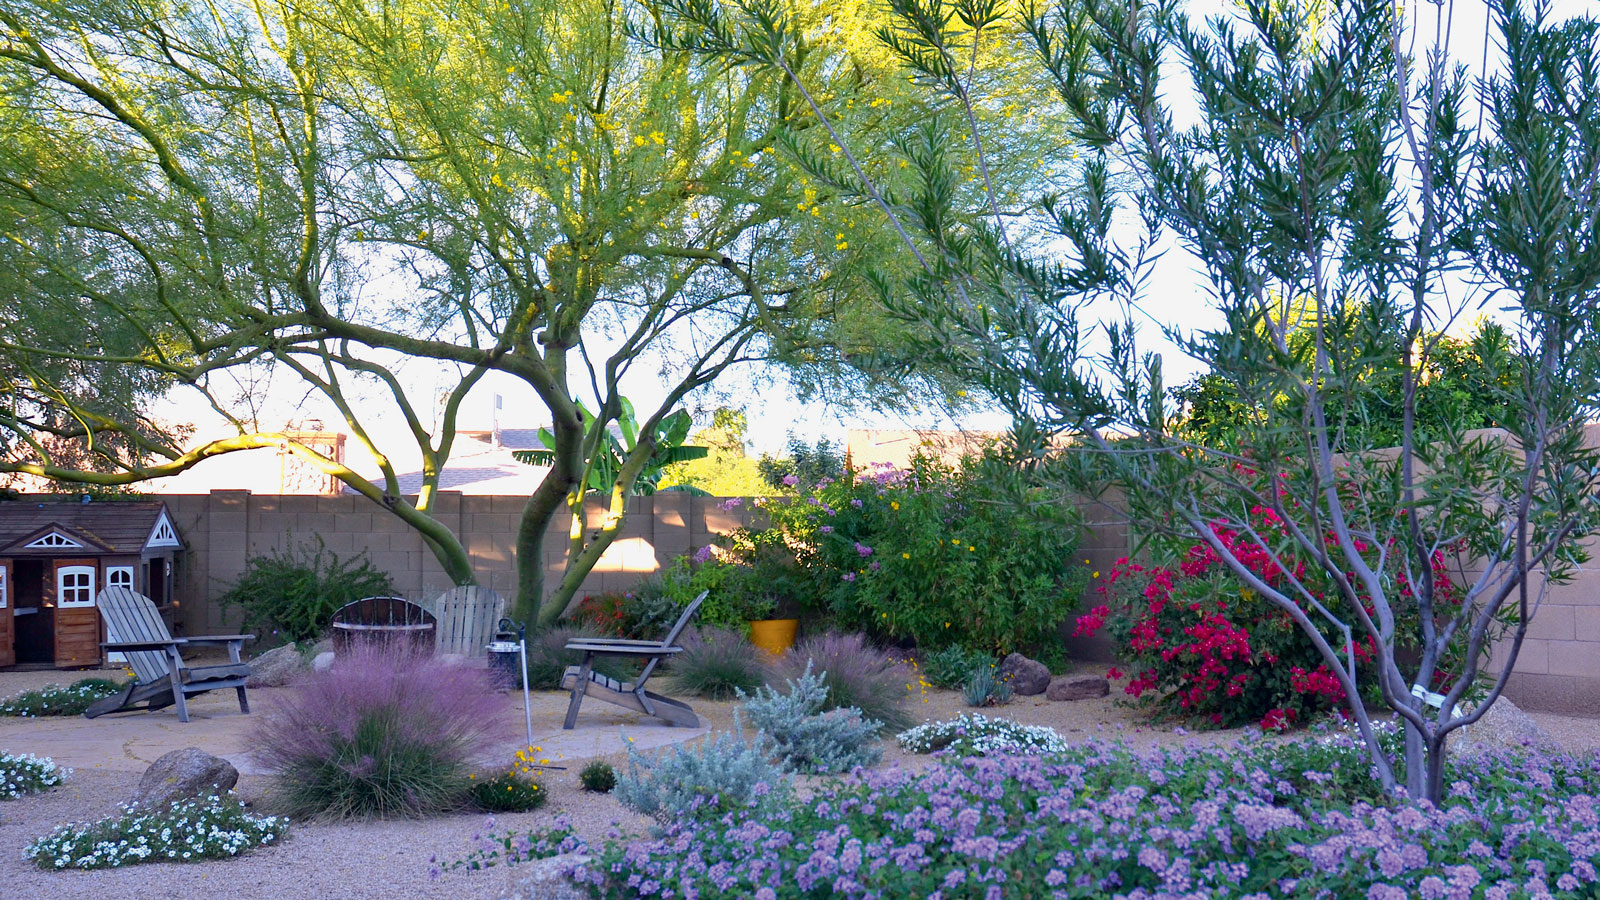 Xeriscaping is the eco-friendly water-wise landscaping method you need to know about